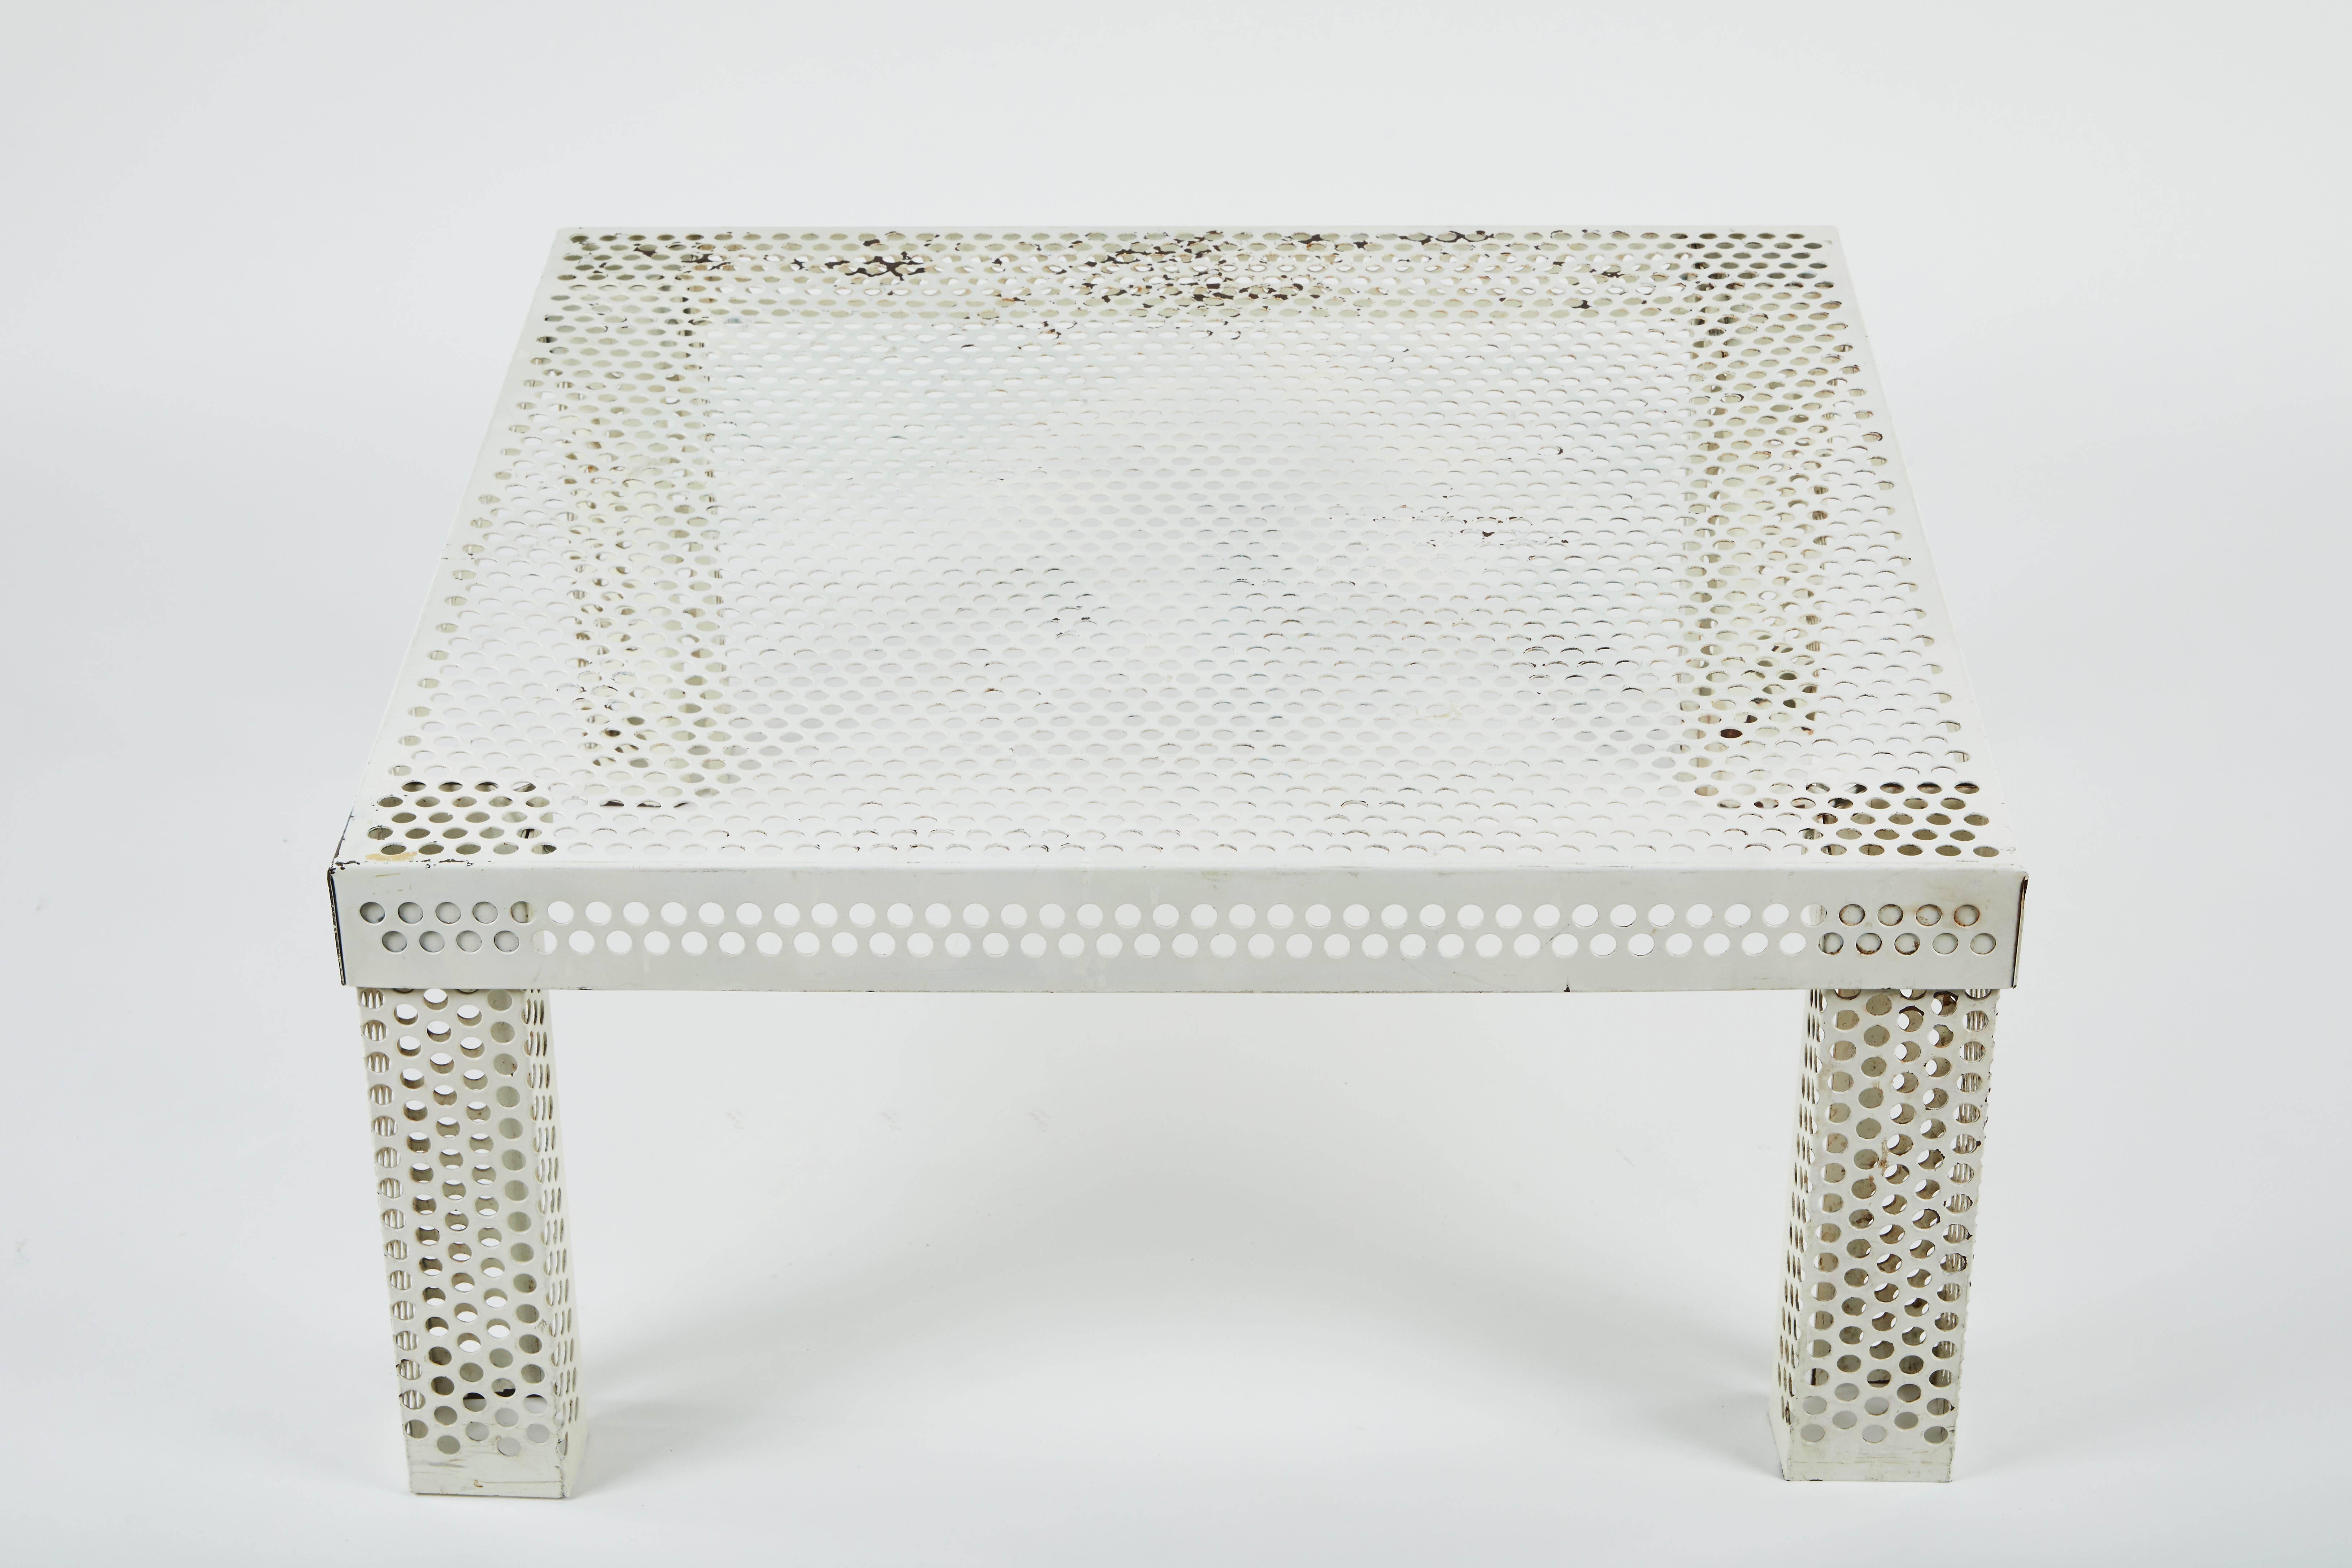 Perforated white lacquered metal coffee table in the style of Mathieu Matégot, circa 1950s. Original condition showing wear consistent with age and use.